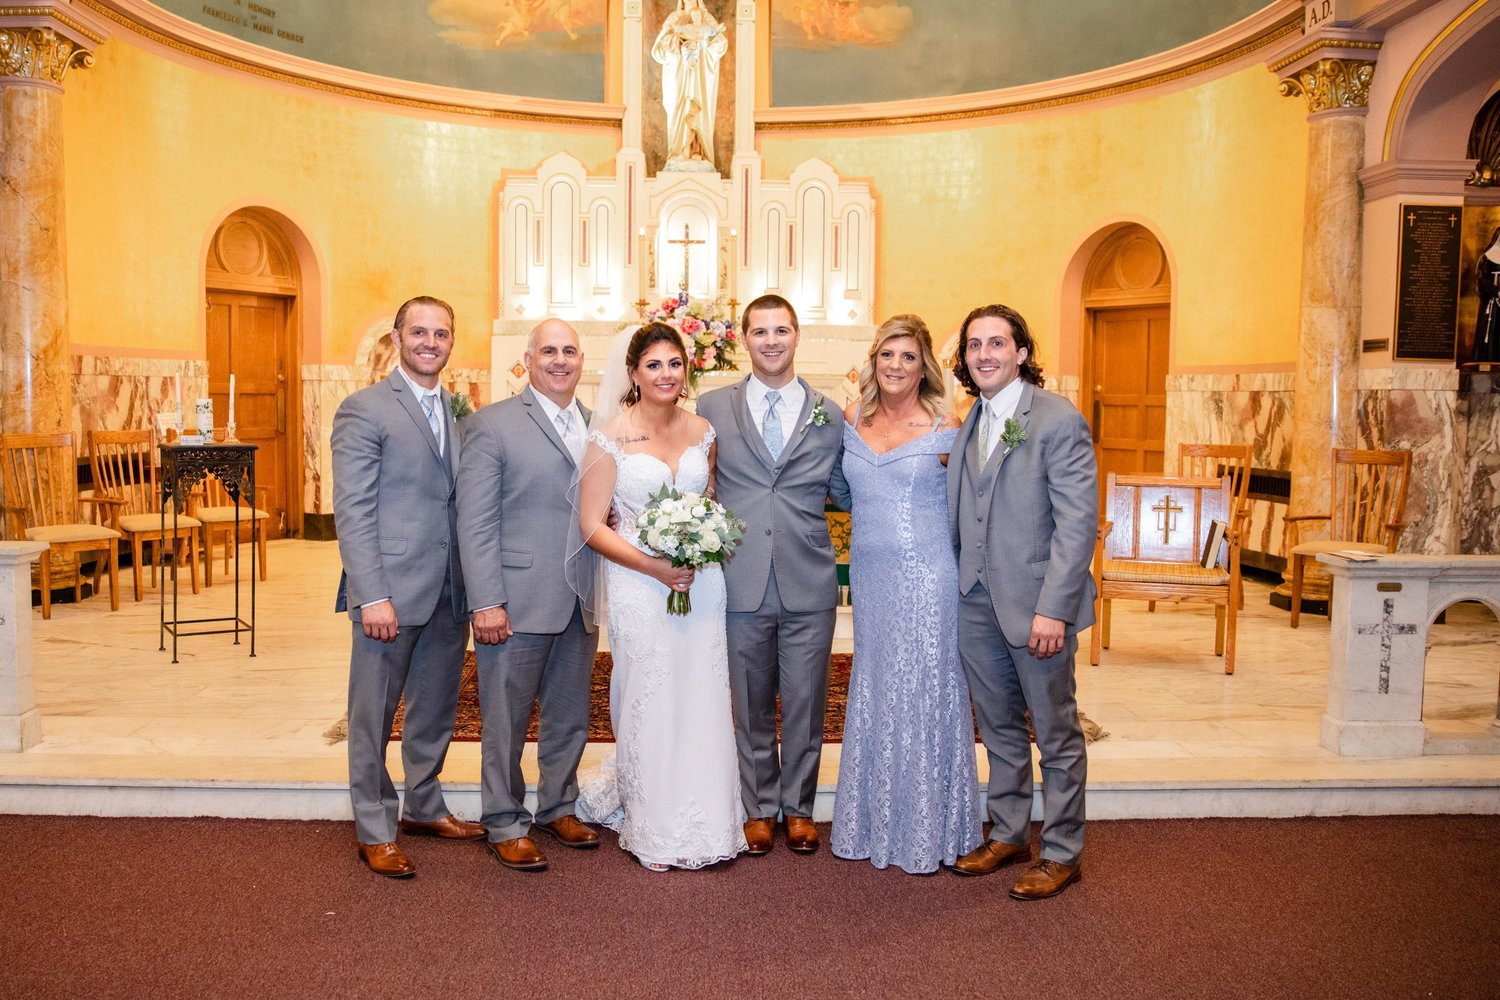 From left: Nick Calenzo, Bob Calenzo, Sarah Schirripa (Calenzo), AJ Schirripa, Jerriann Calenzo, Anthony Calenzo at St. Mary of Mount Carmel Church in Utica.